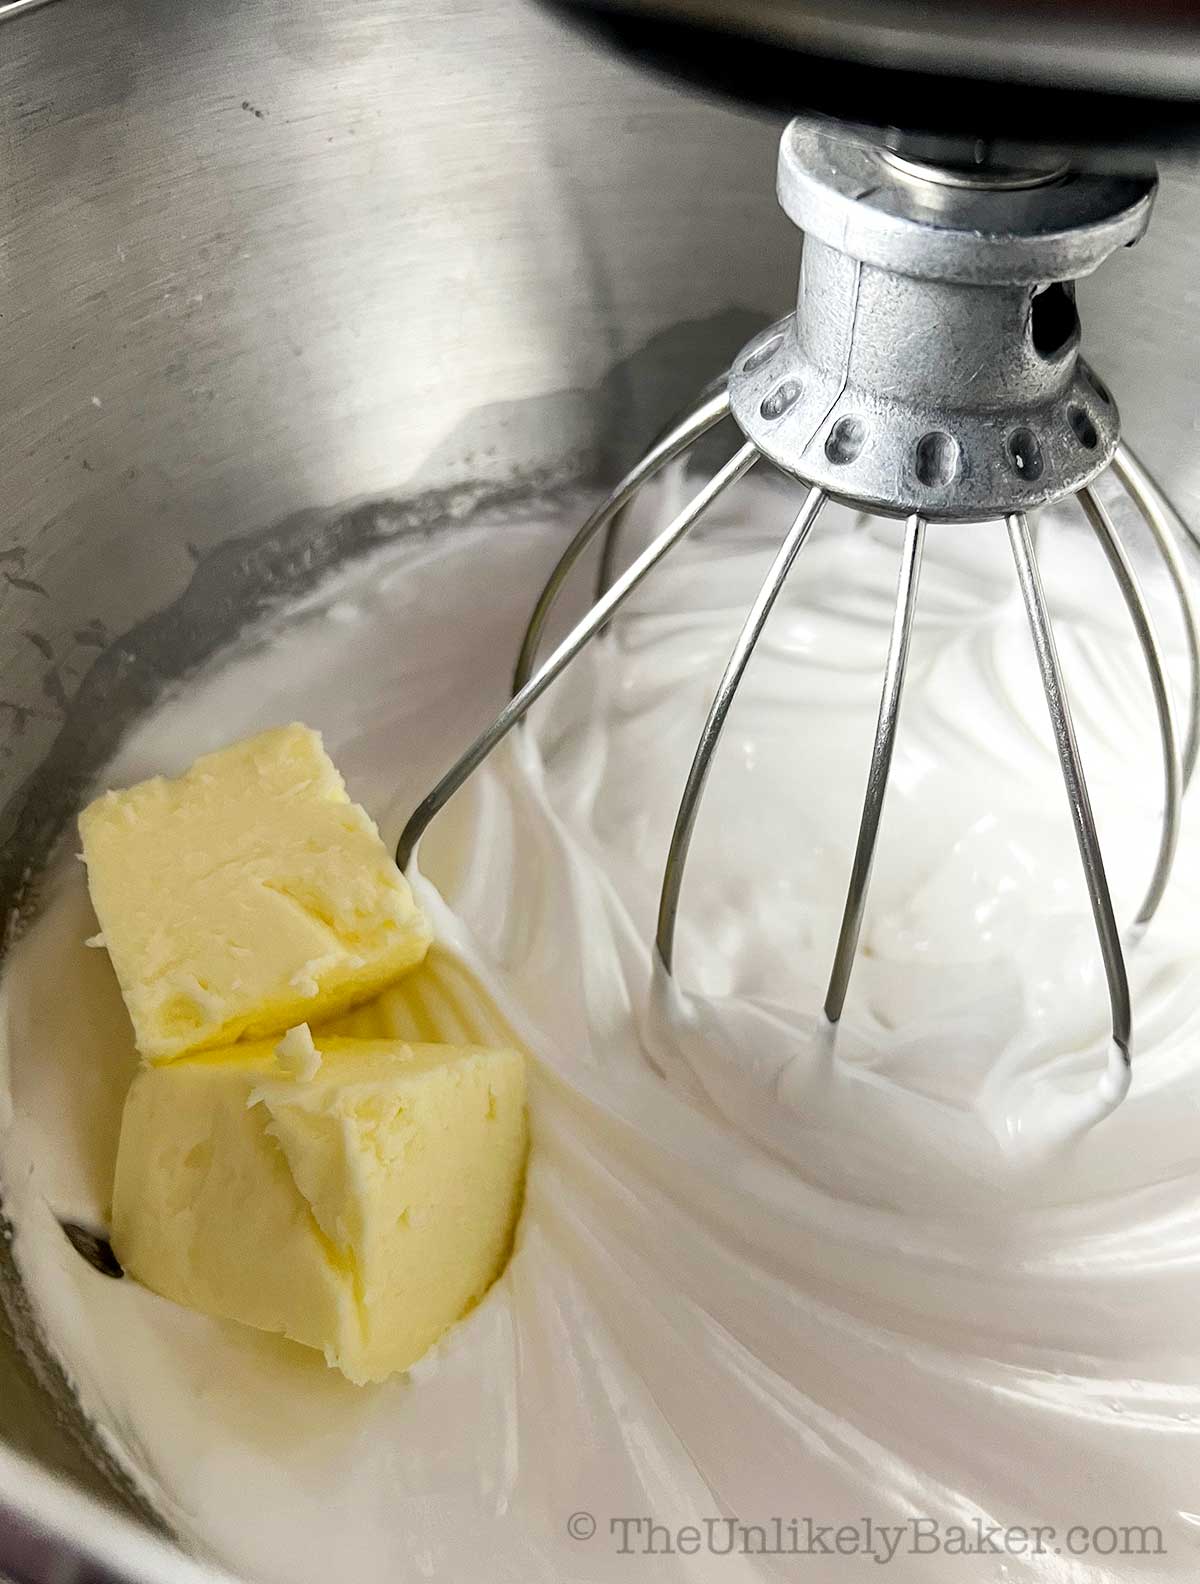 Butter added to stiff egg whites.